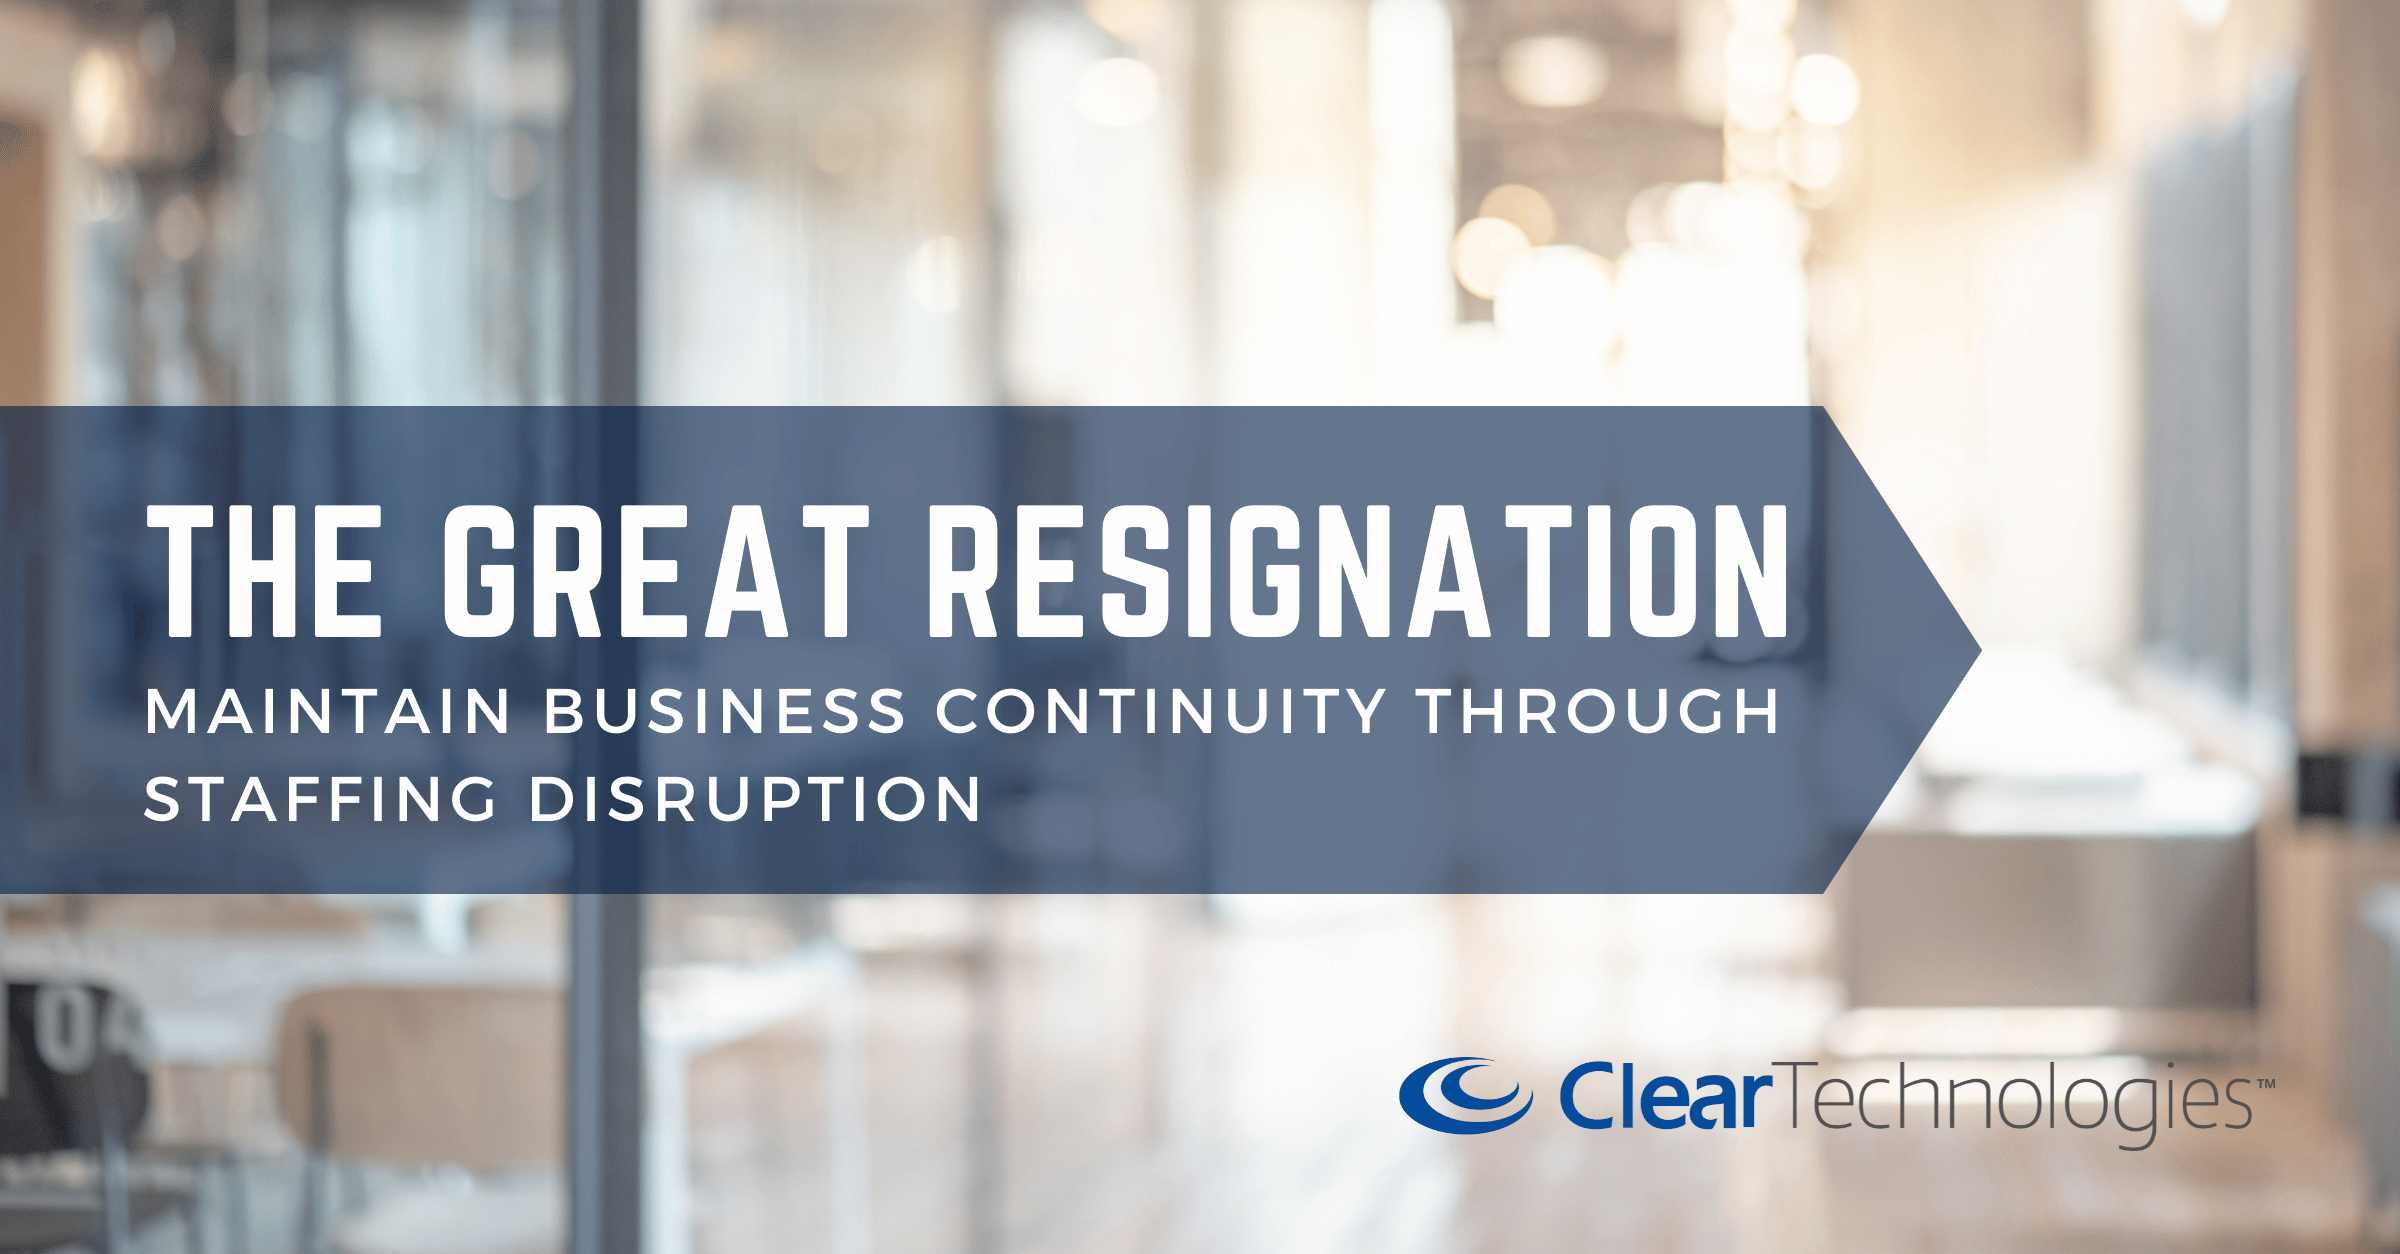 The Great Resignation: Maintain Business Continuity Through Staffing Disruption